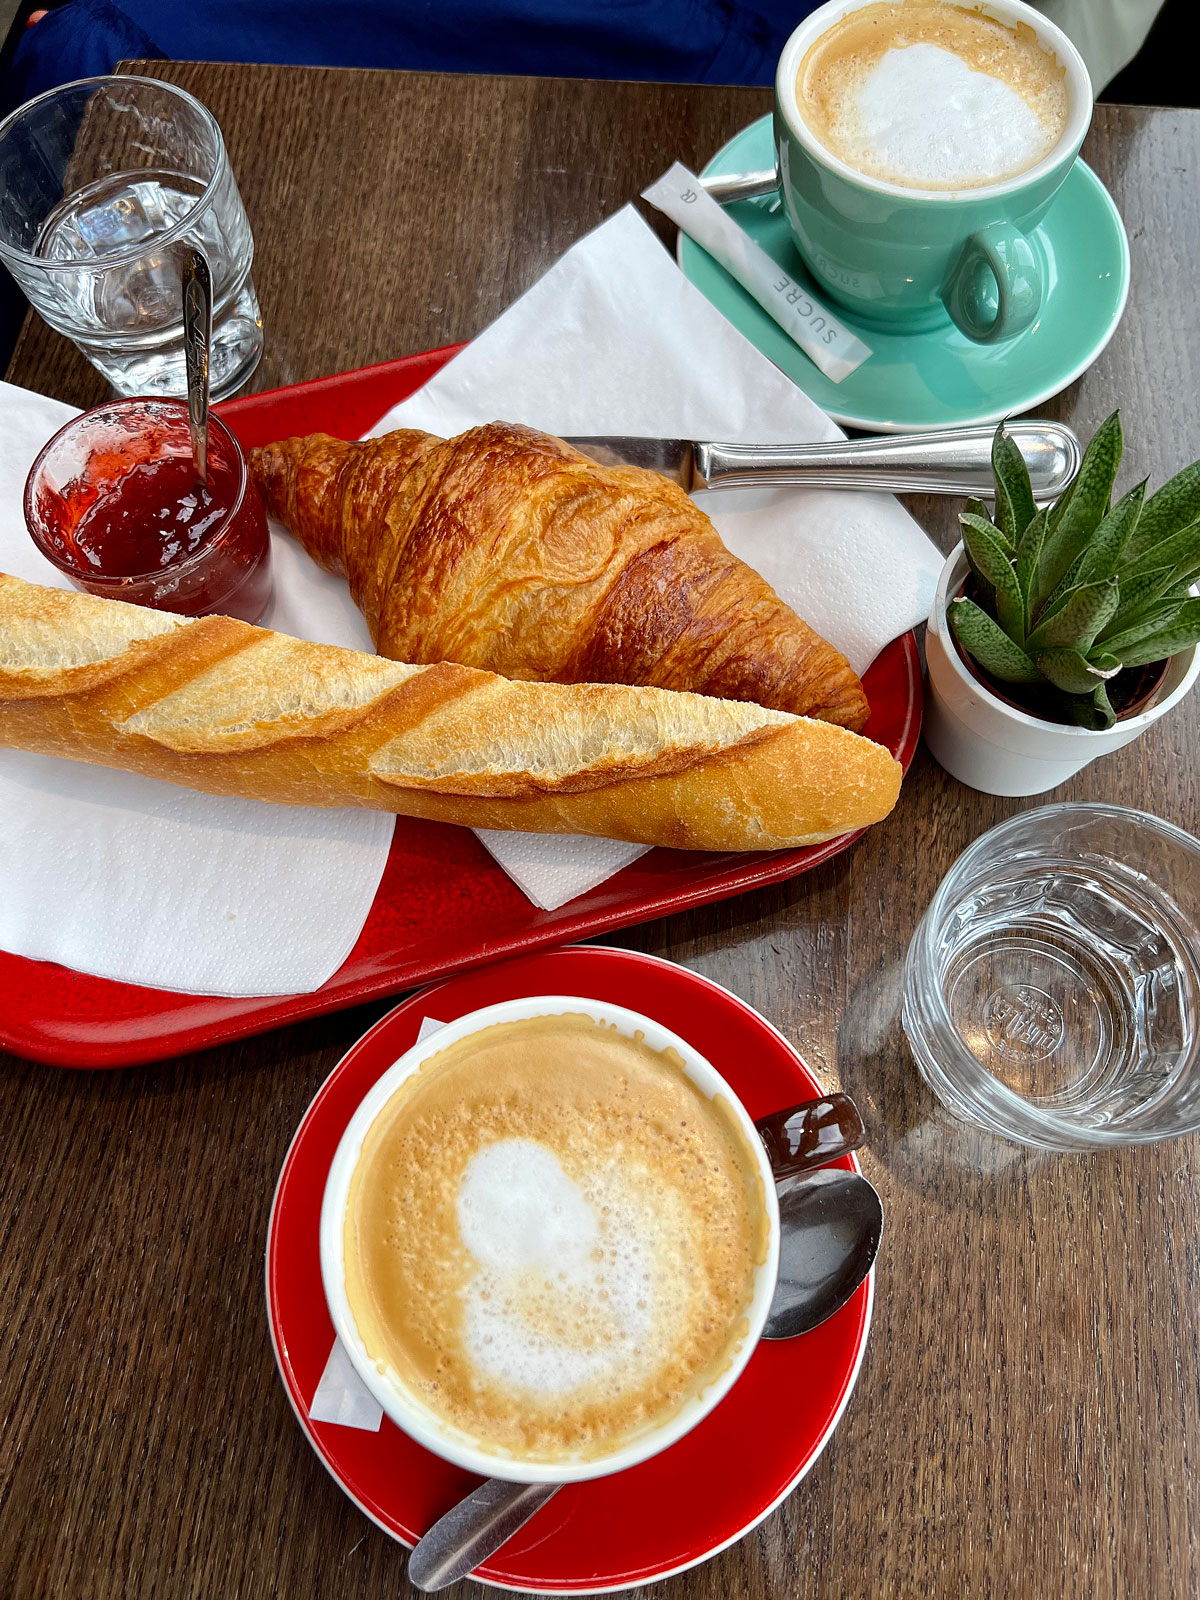 demi-baguette, croissant and coffee